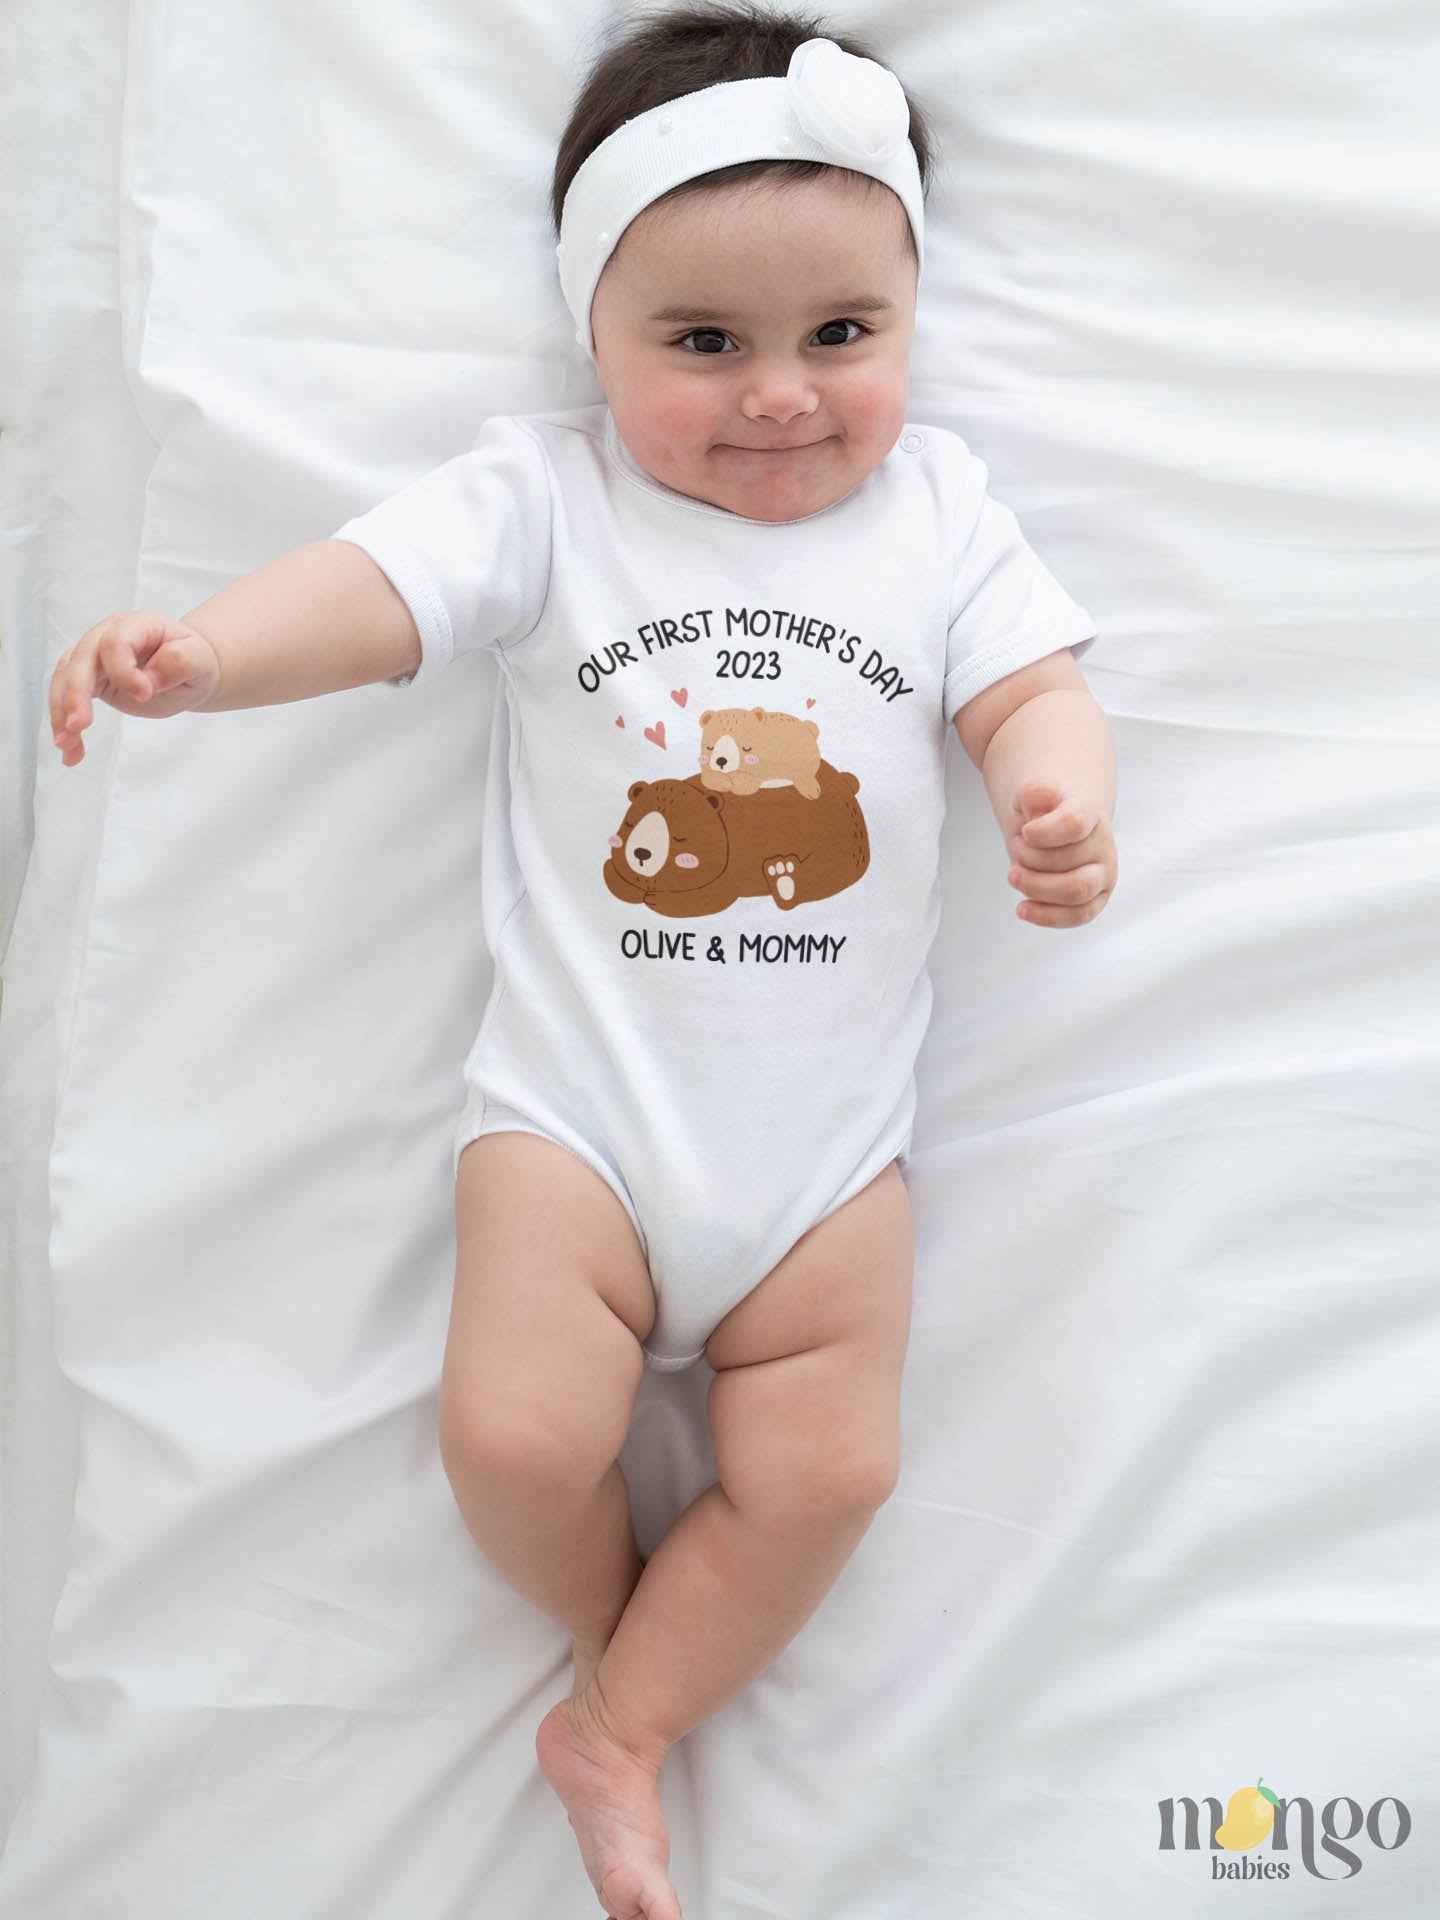 Kid's t-shirt with a cute Mama Bear and Baby Bear design, featuring 'Our First Mother's Day' text, customizable with names.